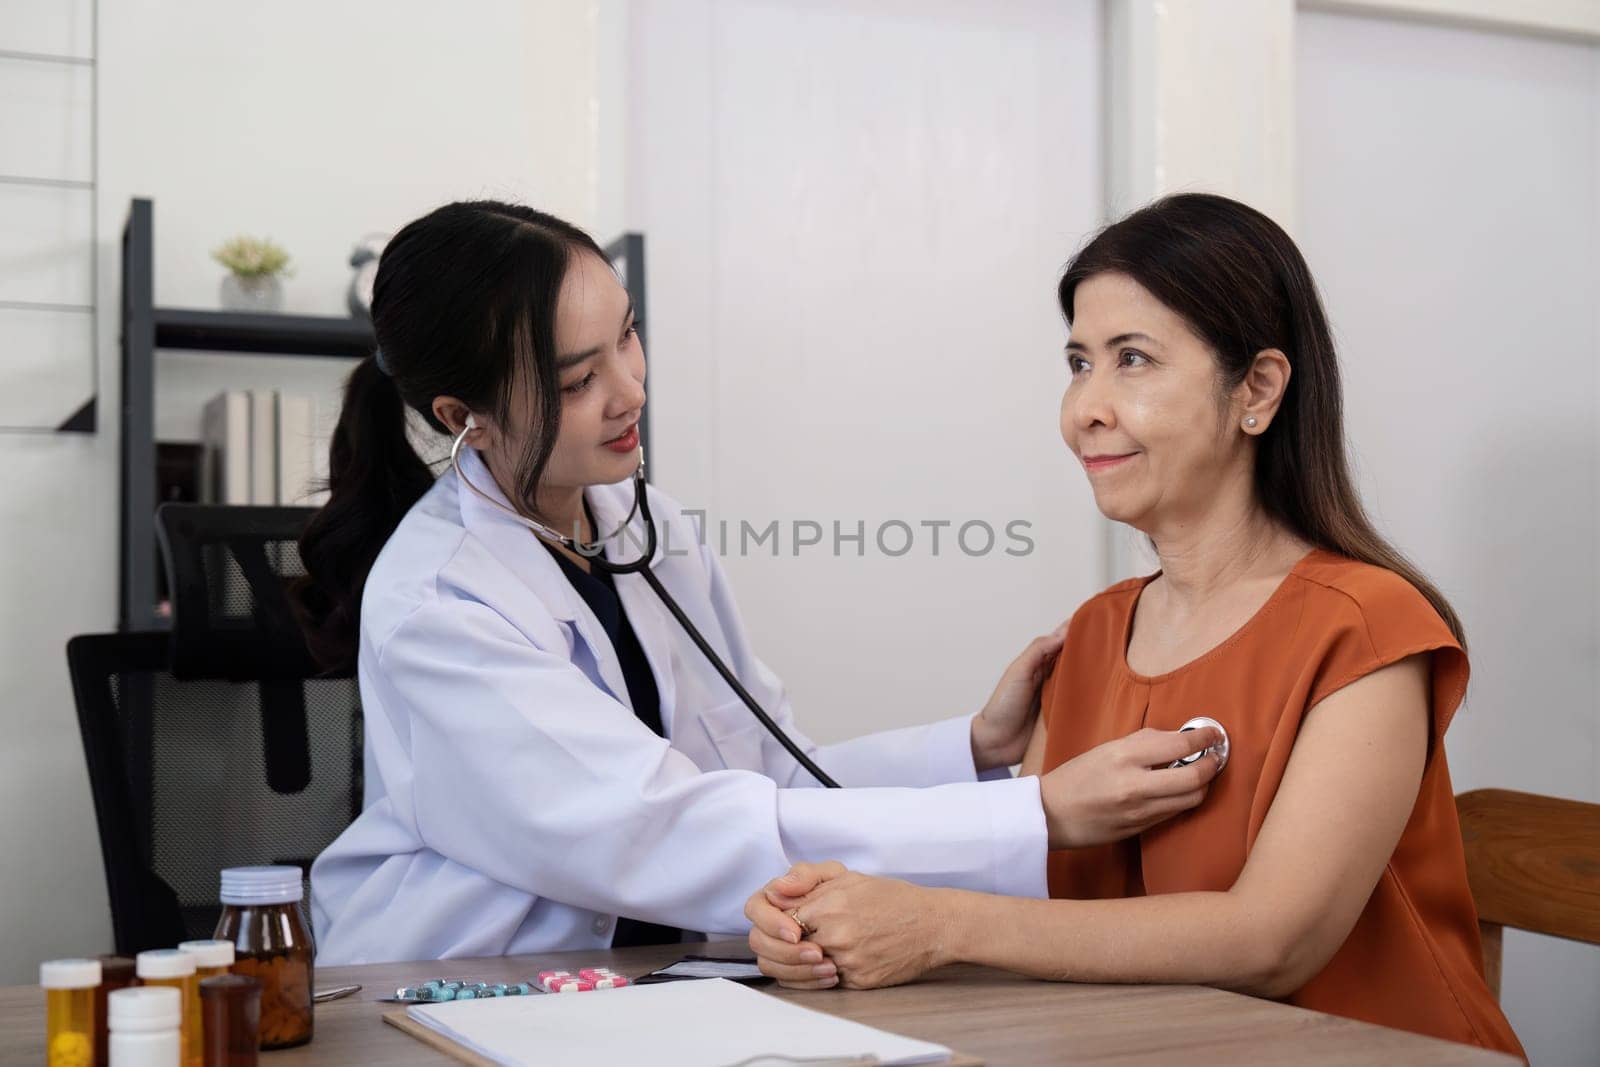 Elderly woman asian patient are check up health while a woman doctor use a stethoscope to hear heart rate. elderly healthcare concept by nateemee